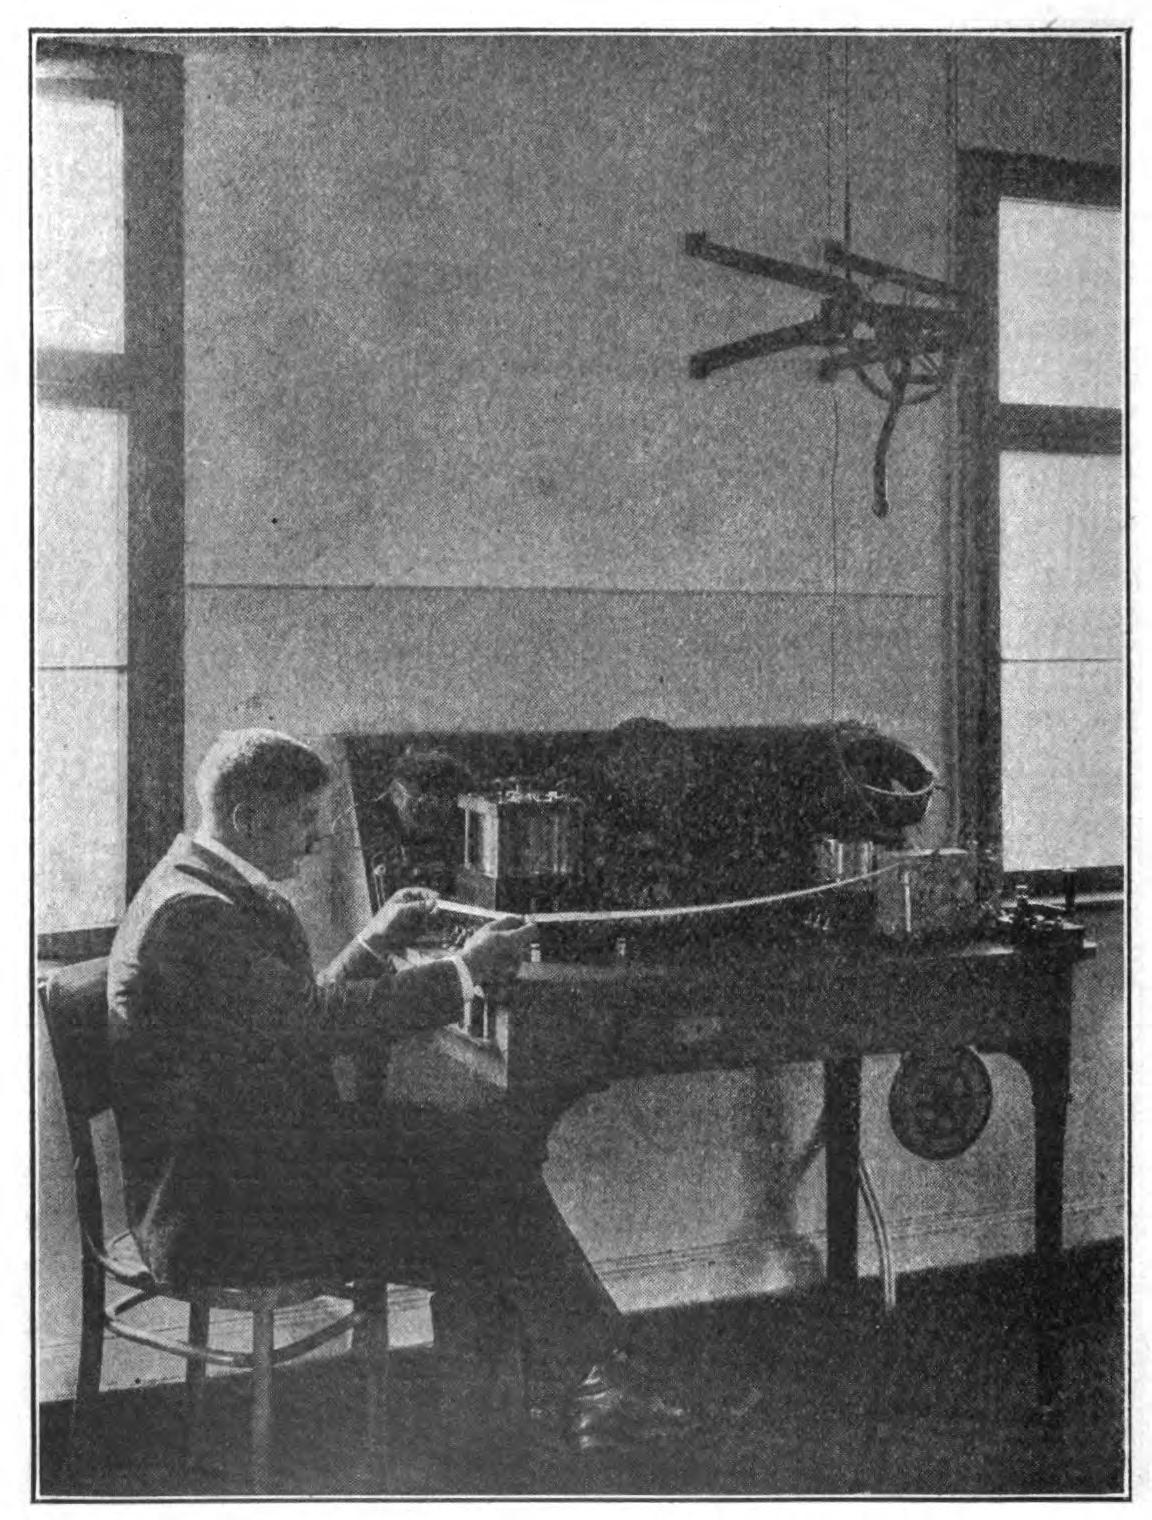 FIG. 119.—The receiving apparatus of the station at Nauen. The message is being printed on tape by a recording device.